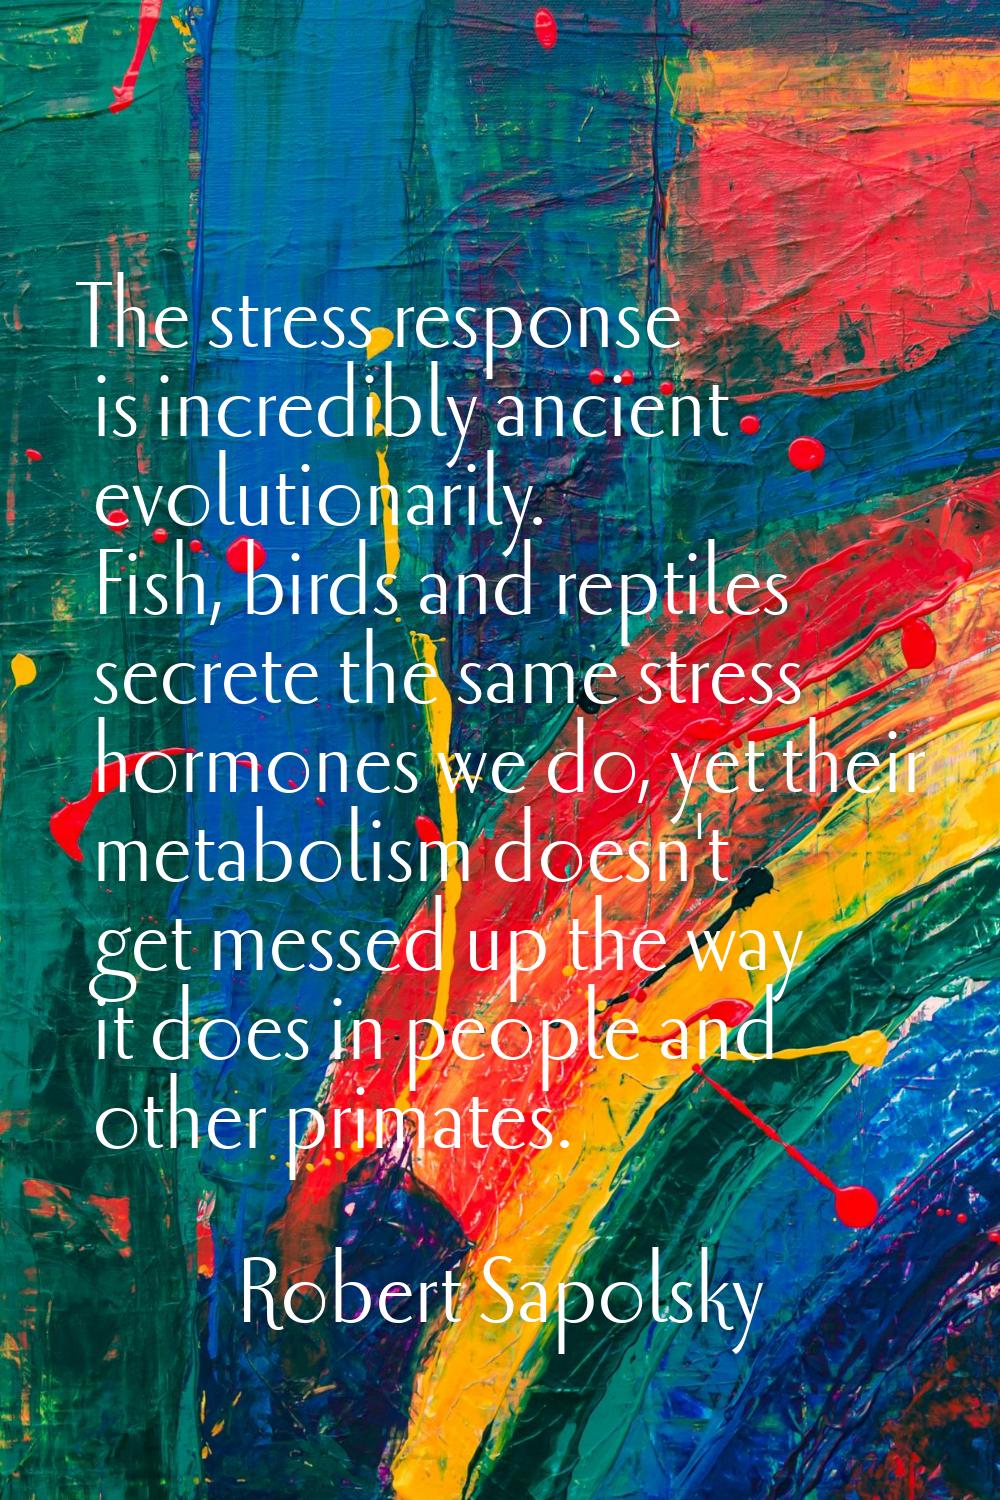 The stress response is incredibly ancient evolutionarily. Fish, birds and reptiles secrete the same